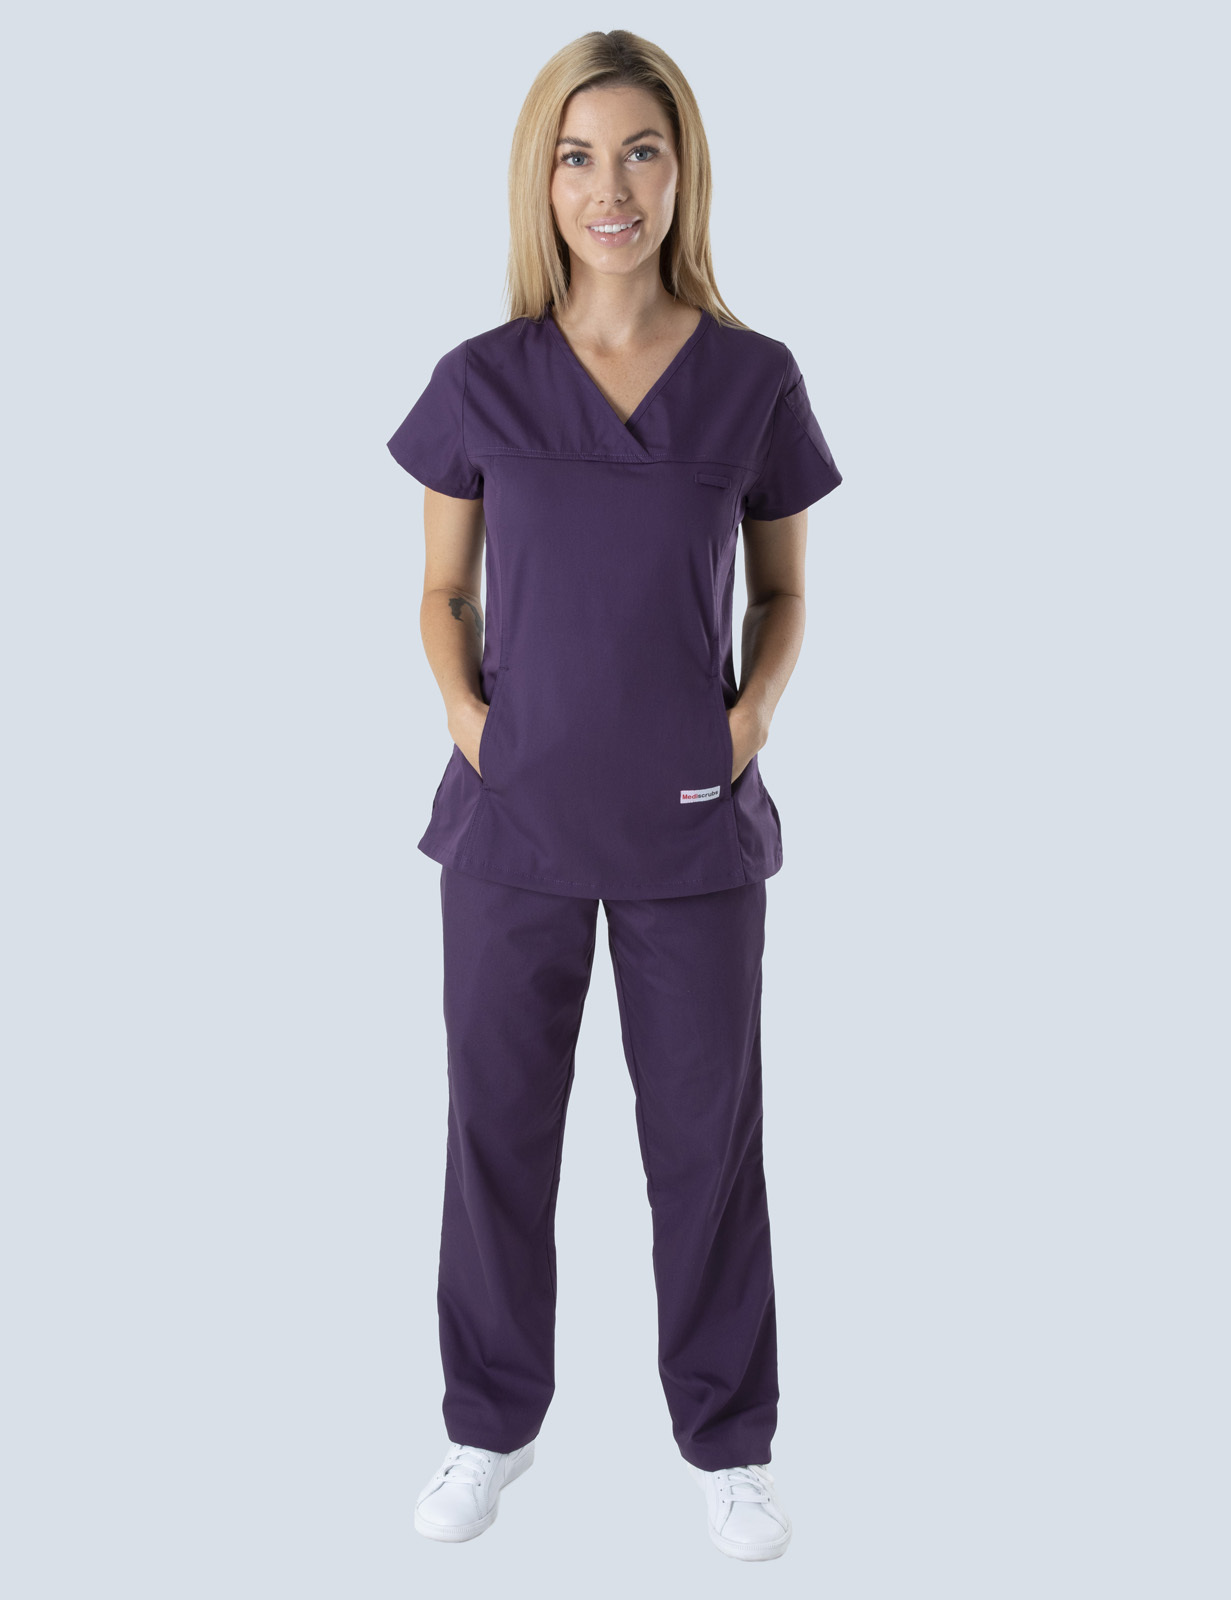 Maleny Hospital - Midwife (Women's Fit Solid Scrub Top and Cargo Pants in Aubergine incl Logos)